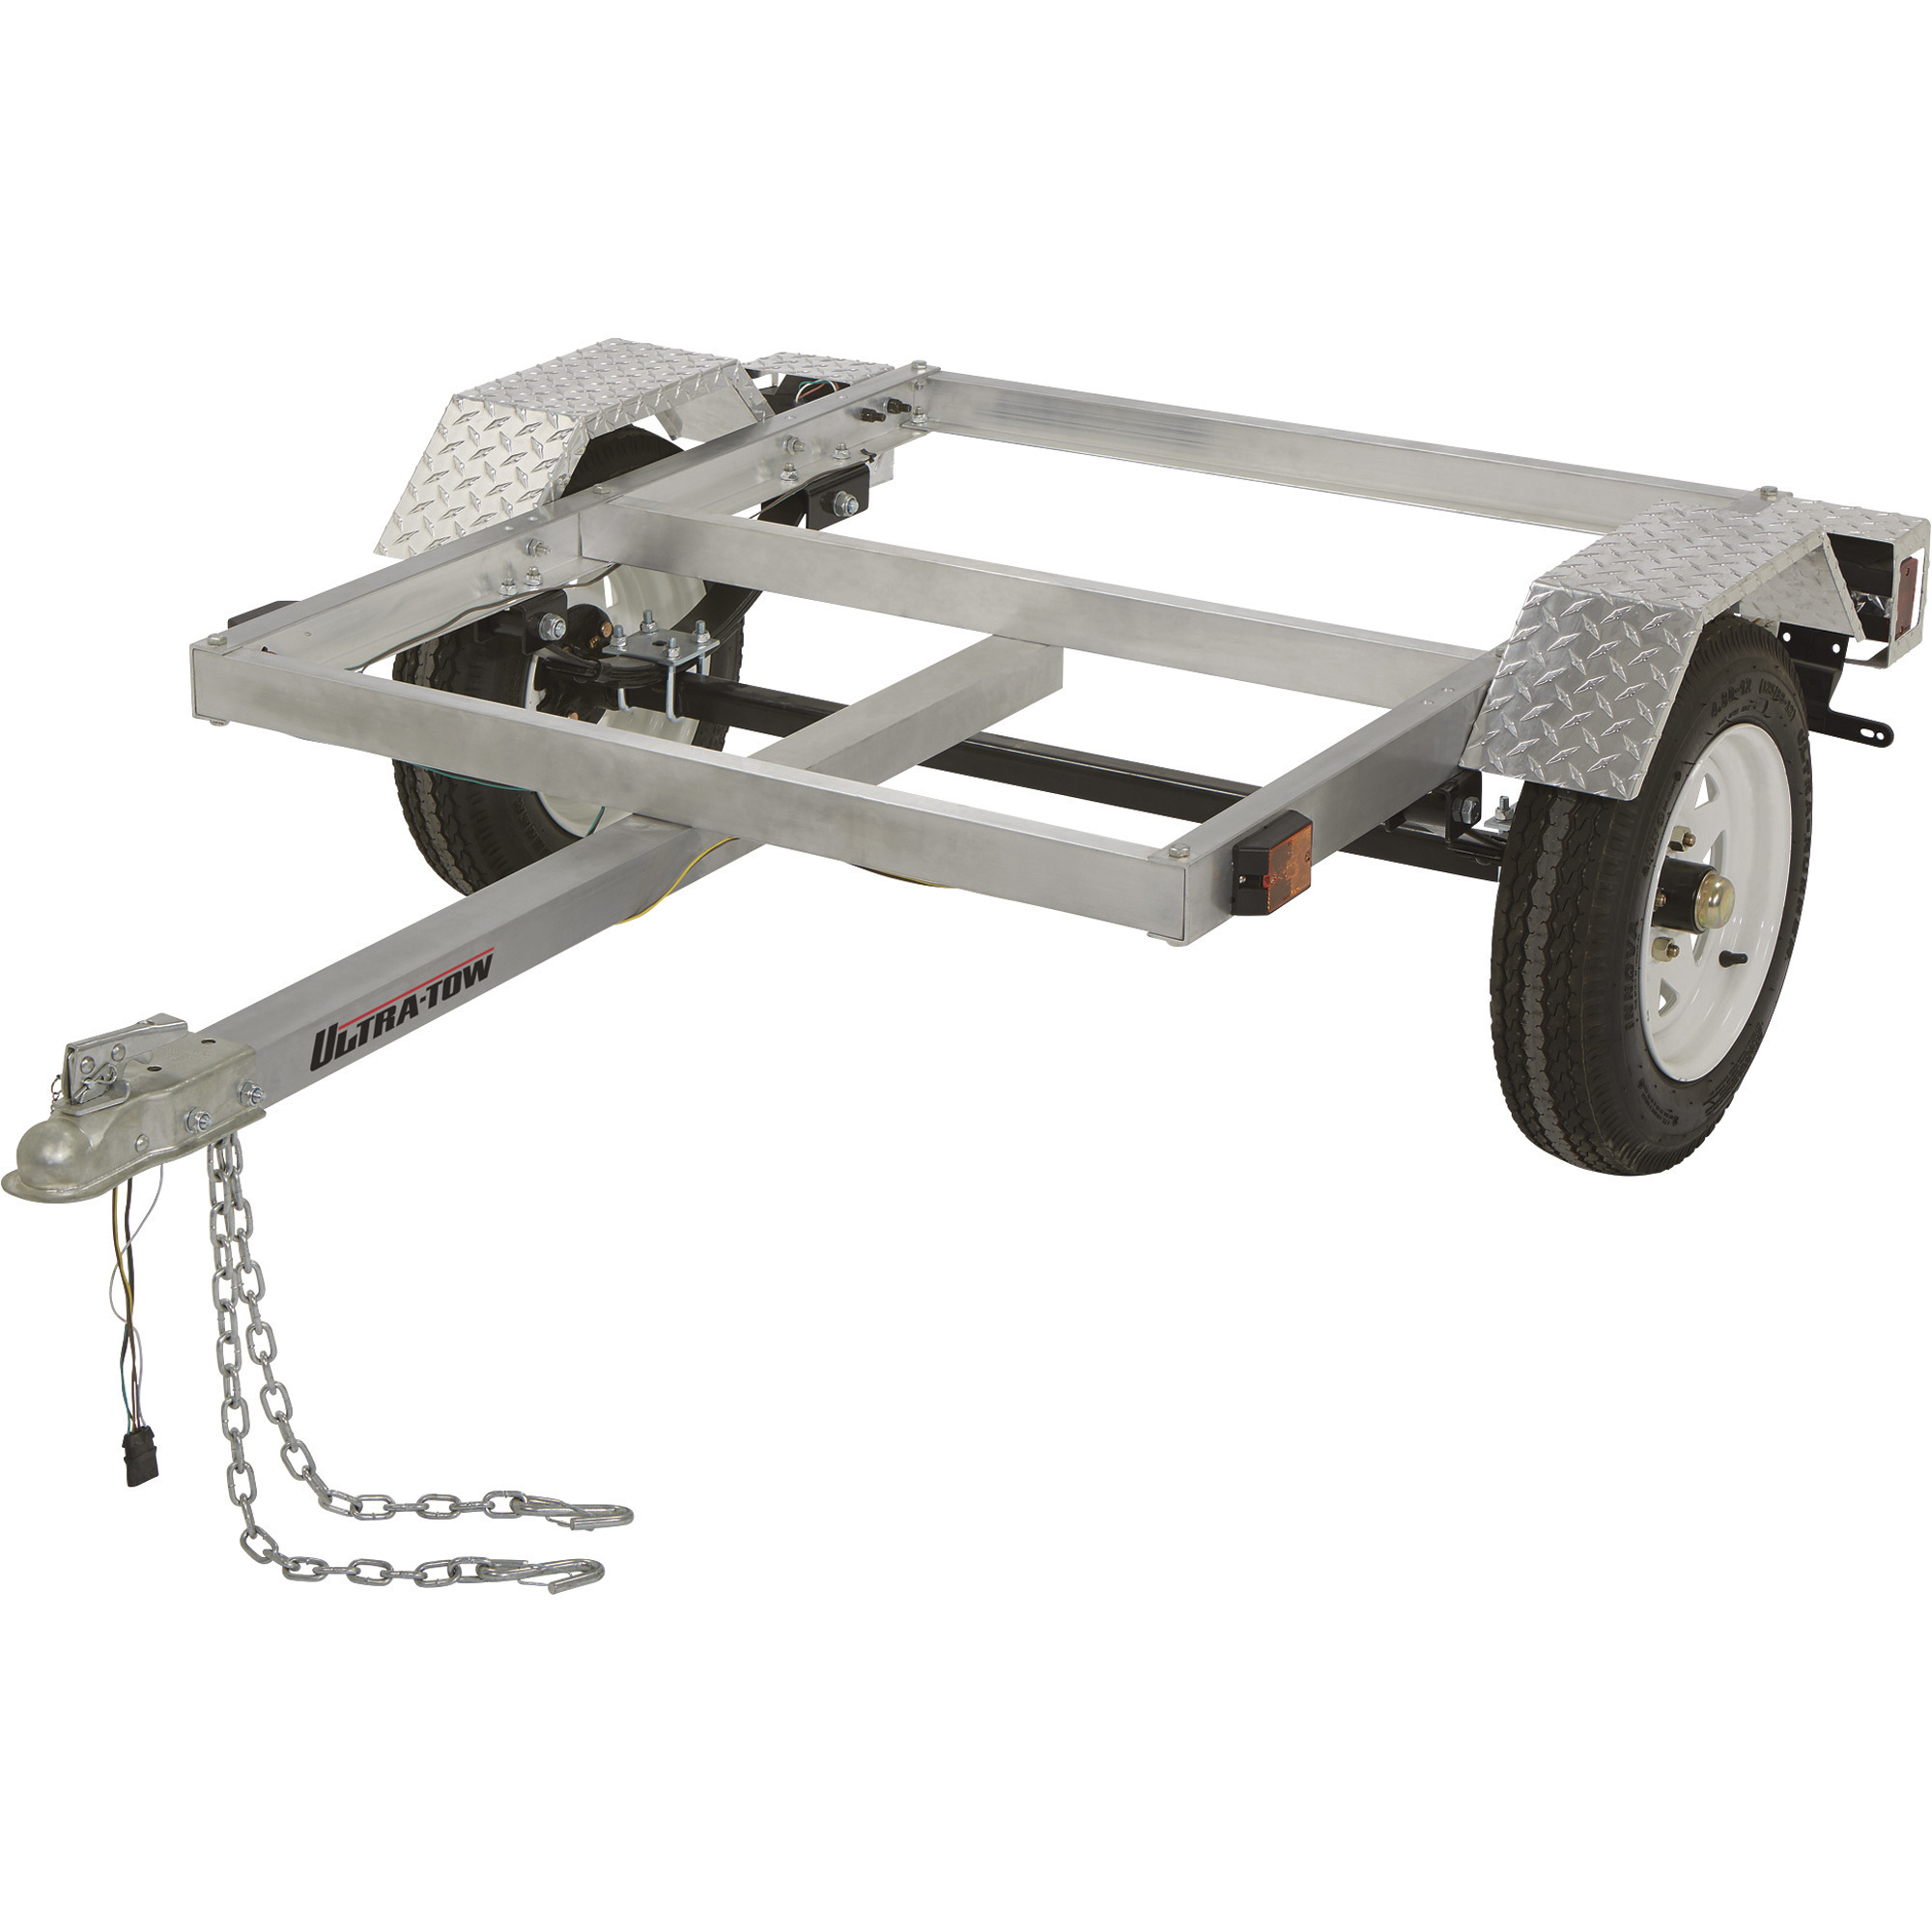 Ultra-Tow 40Inch x 48Inch Aluminum Utility Trailer Kit, 1060-Lb. Load Capacity